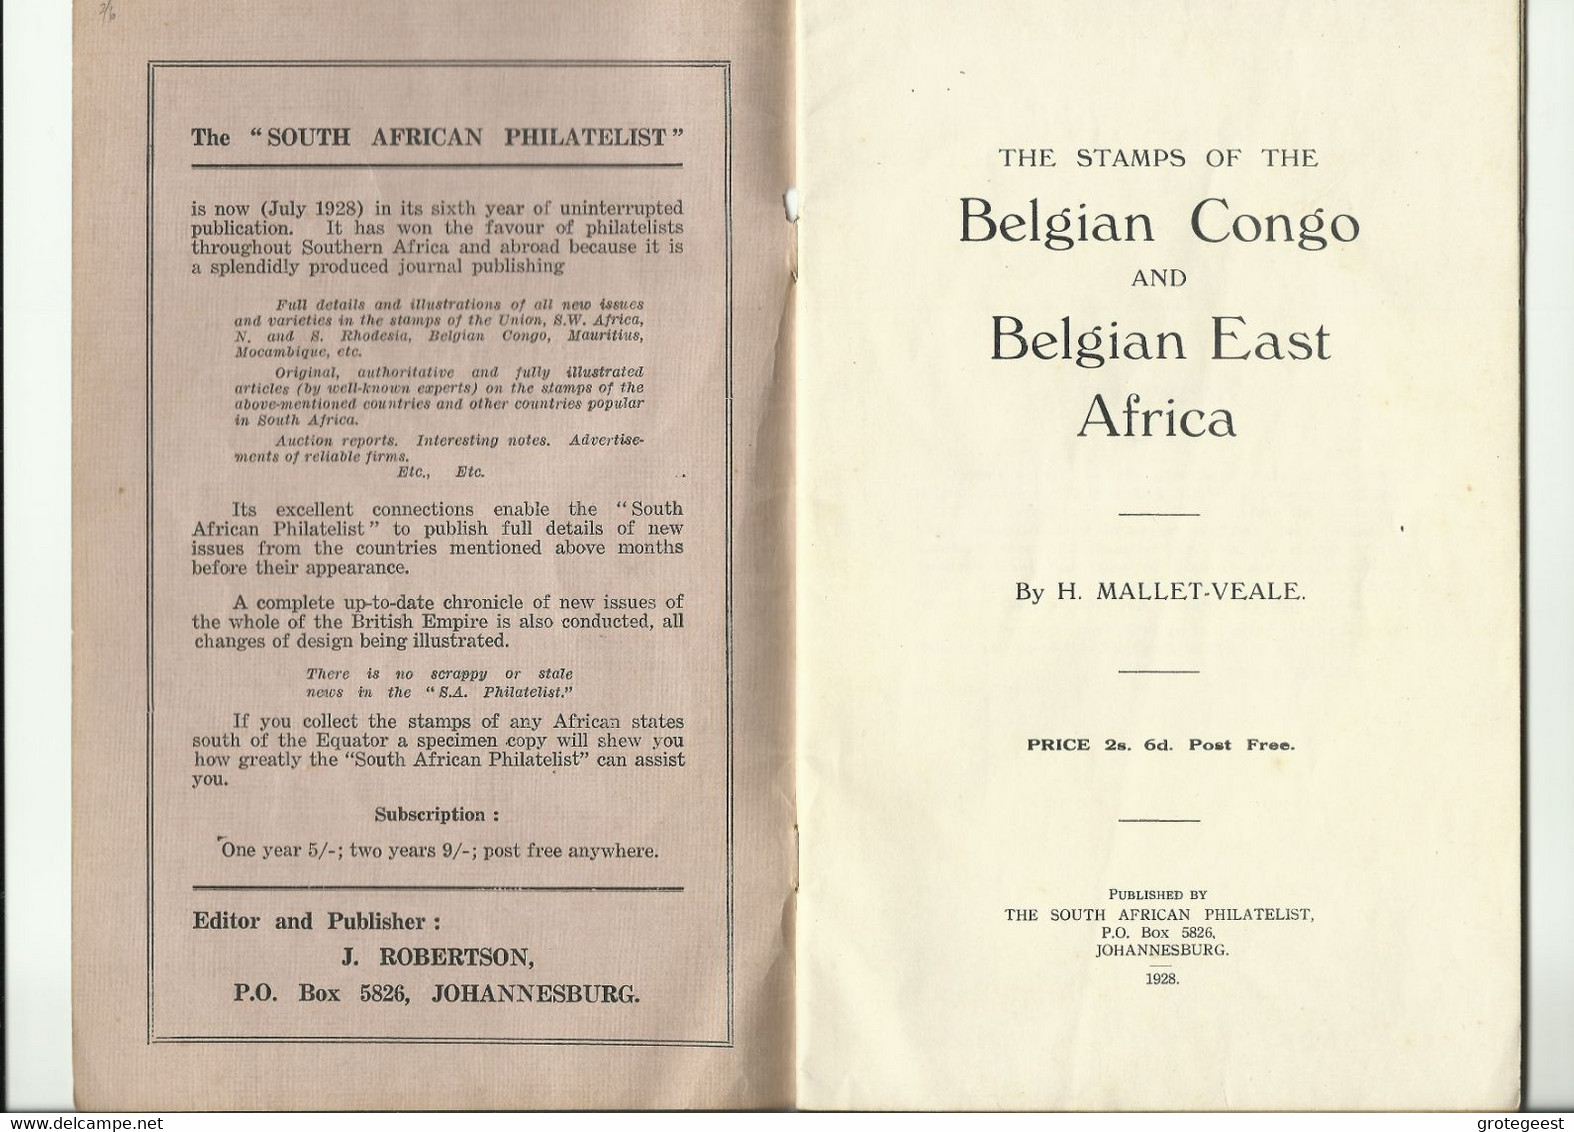 The Stamps Of The Belgian COngo And Belgian East Africa By H.Mallet-Veale, The South African Philatelist Johannesburg, 1 - Colonies And Offices Abroad